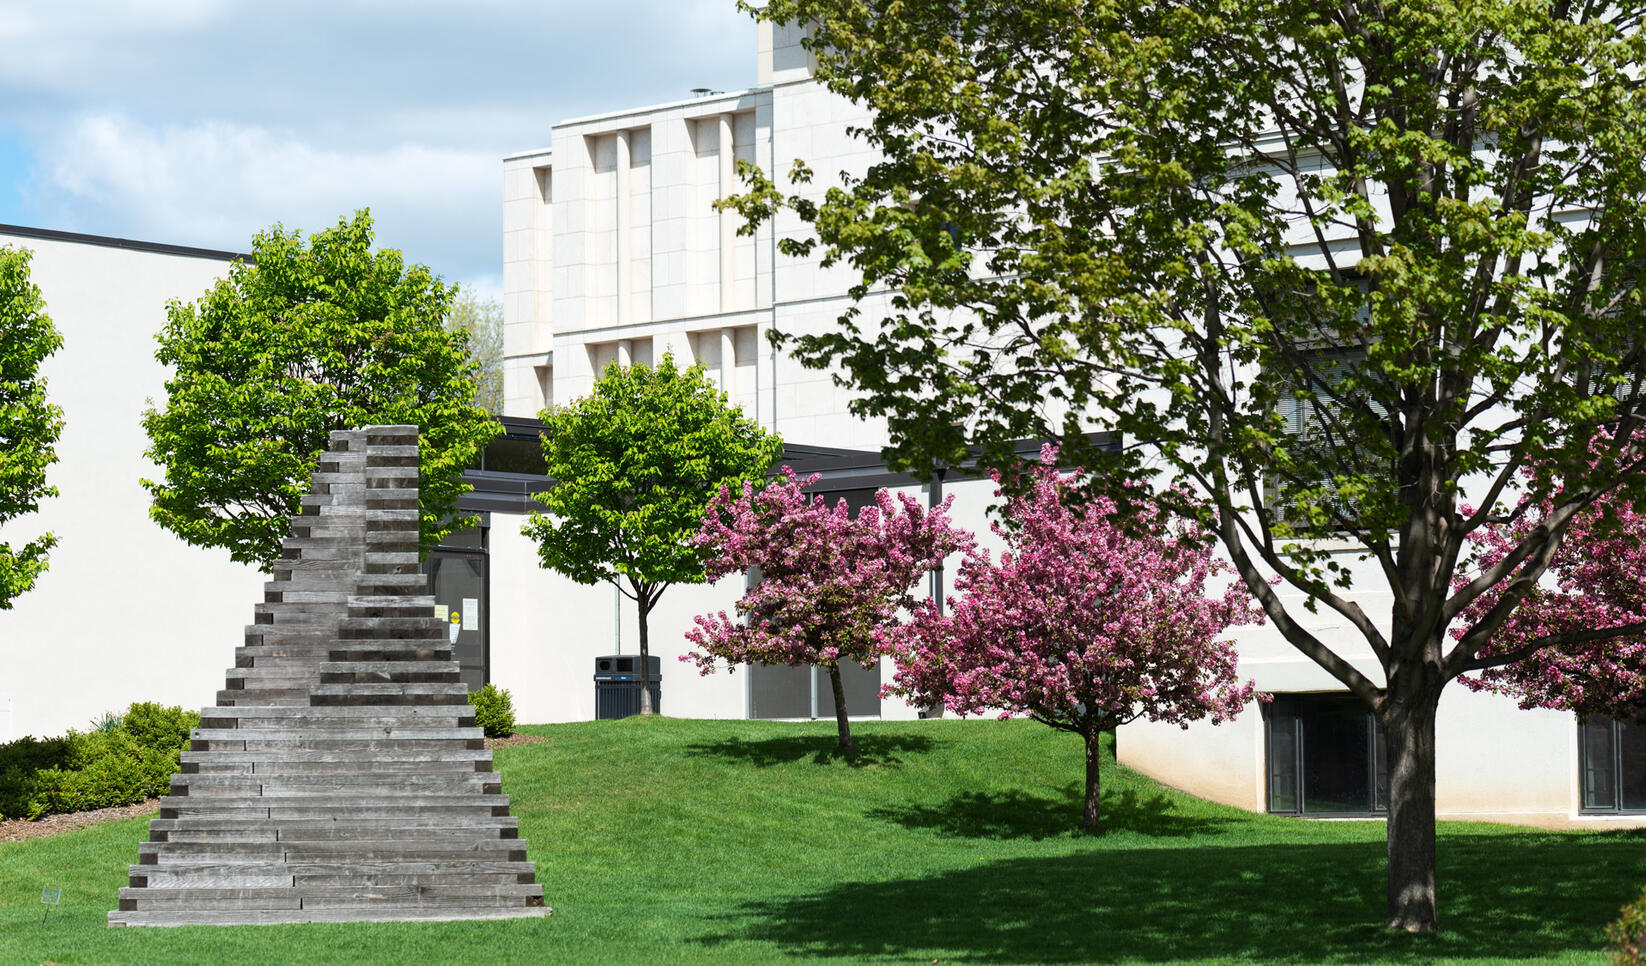 MCAD campus in the Spring